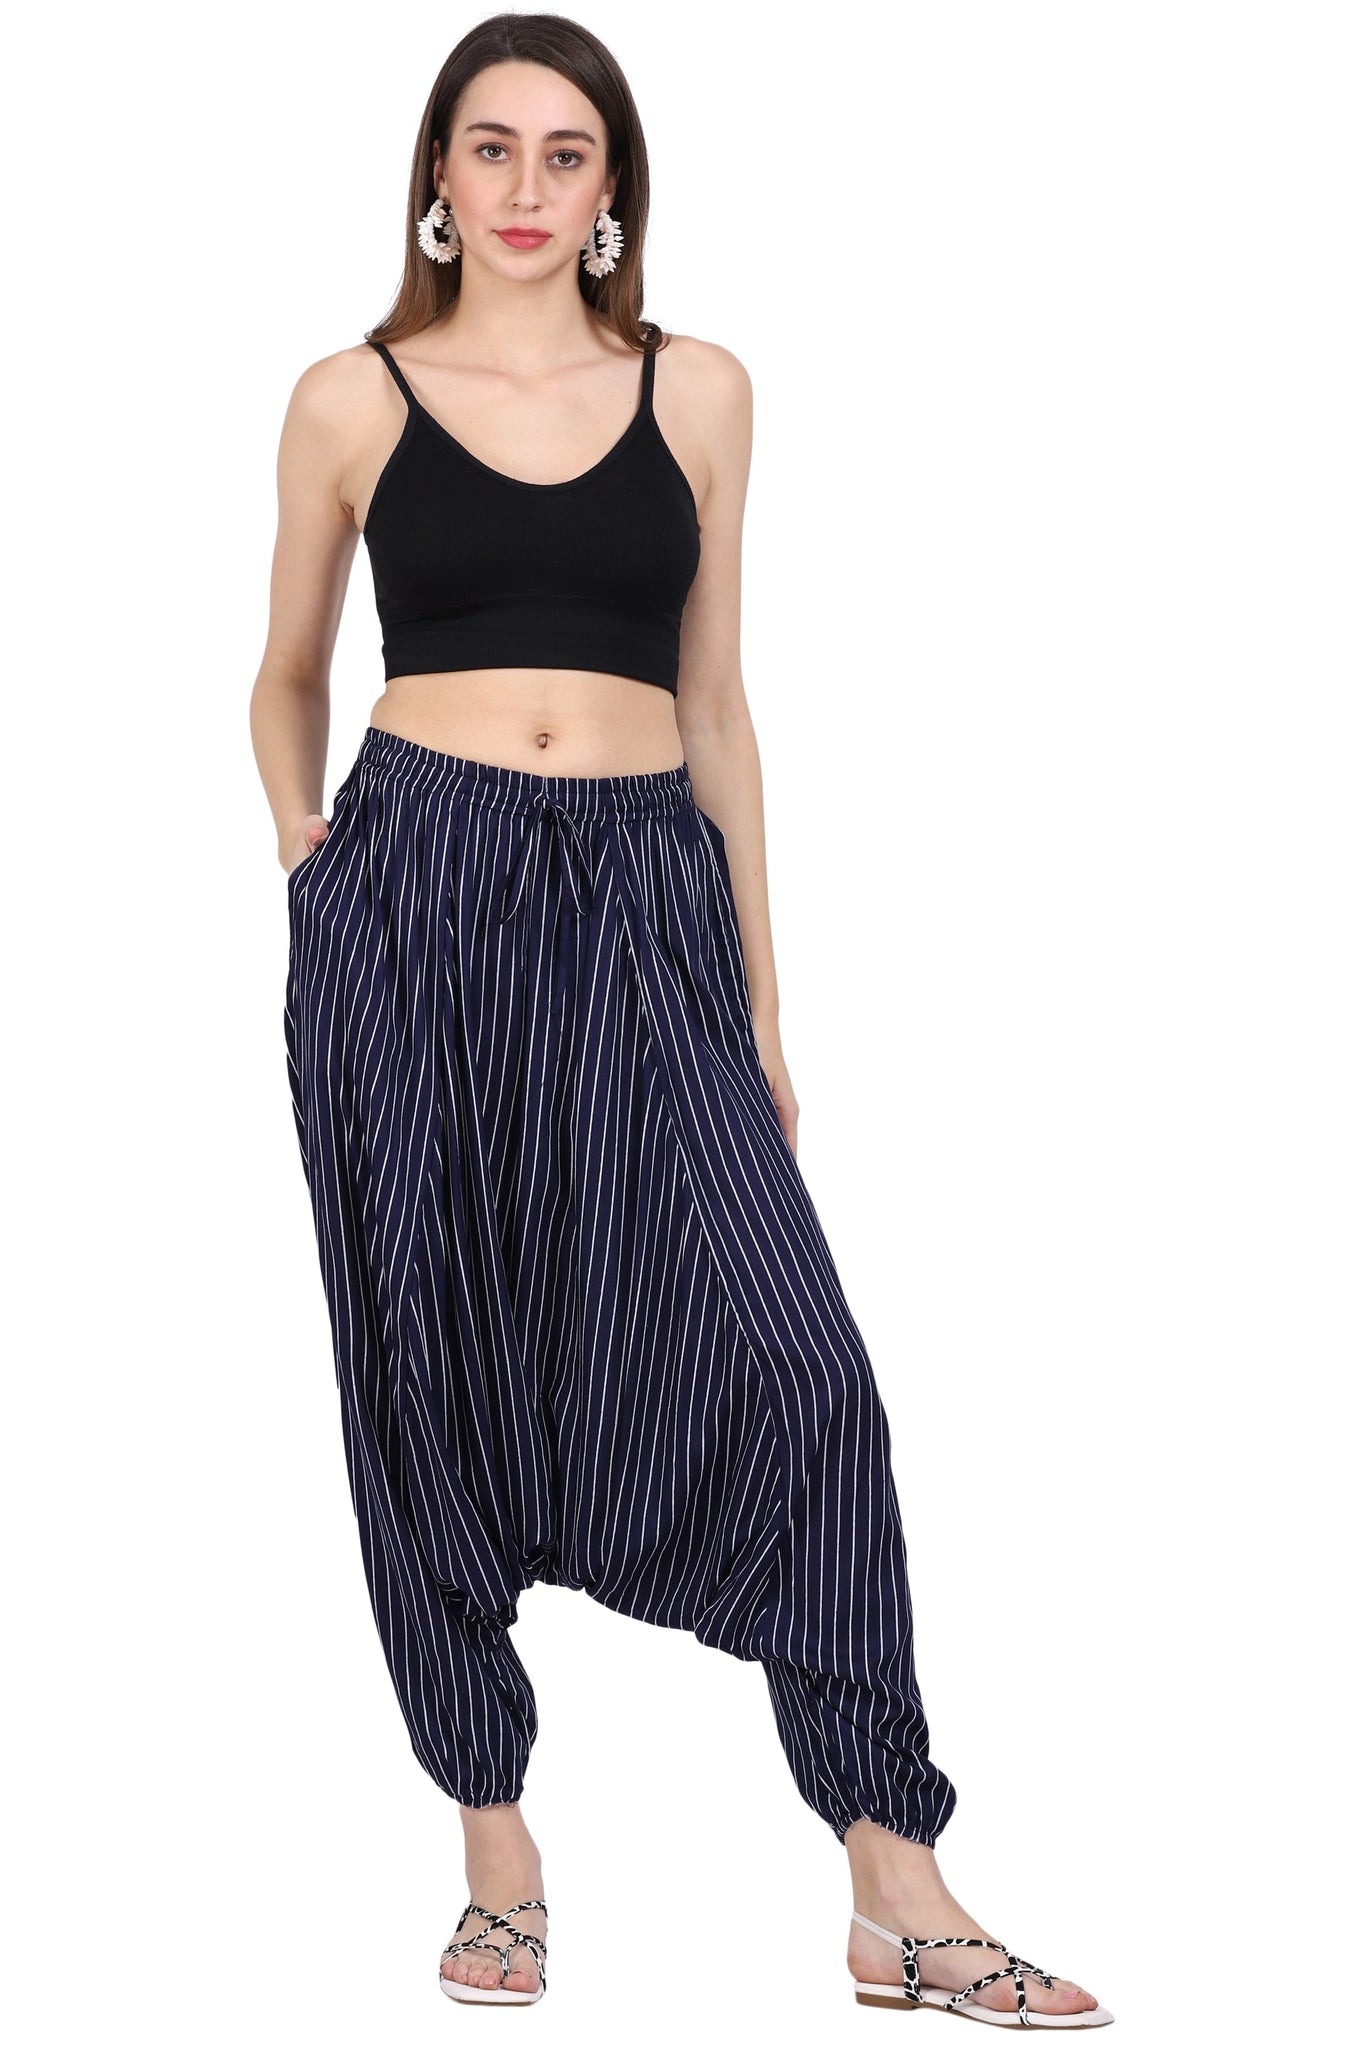 Navy Blue Solid Color Dhoti Harem Pants for Girls  Women  Zubix   Clothing Accessories and Home Furnishing Shop Online